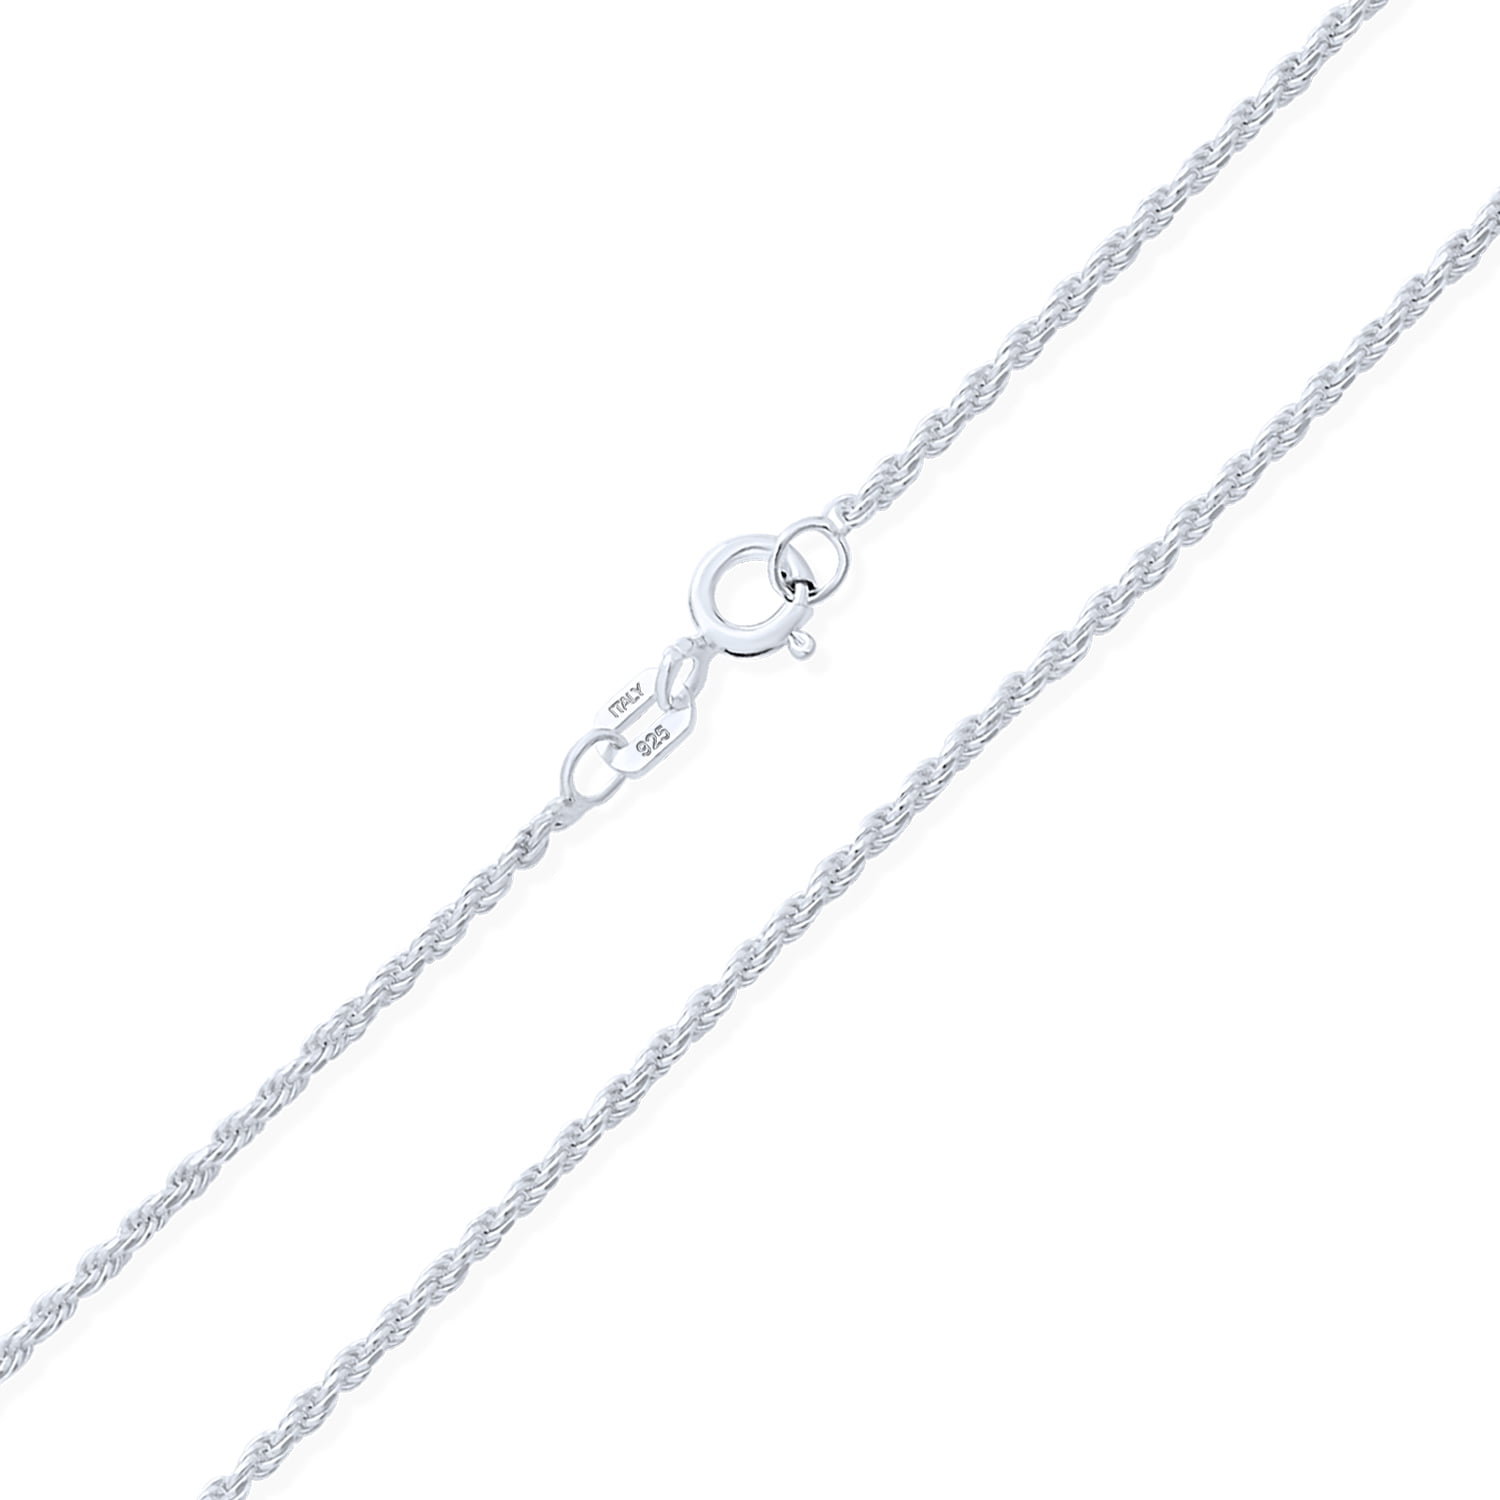 Men & Women 16-30 Authentic Solid Sterling Silver Rope Diamond-Cut Braided Twist Link .925 ITProLux Necklace Chains 1.5MM 5.5MM Made In Italy Next Level Jewelry 